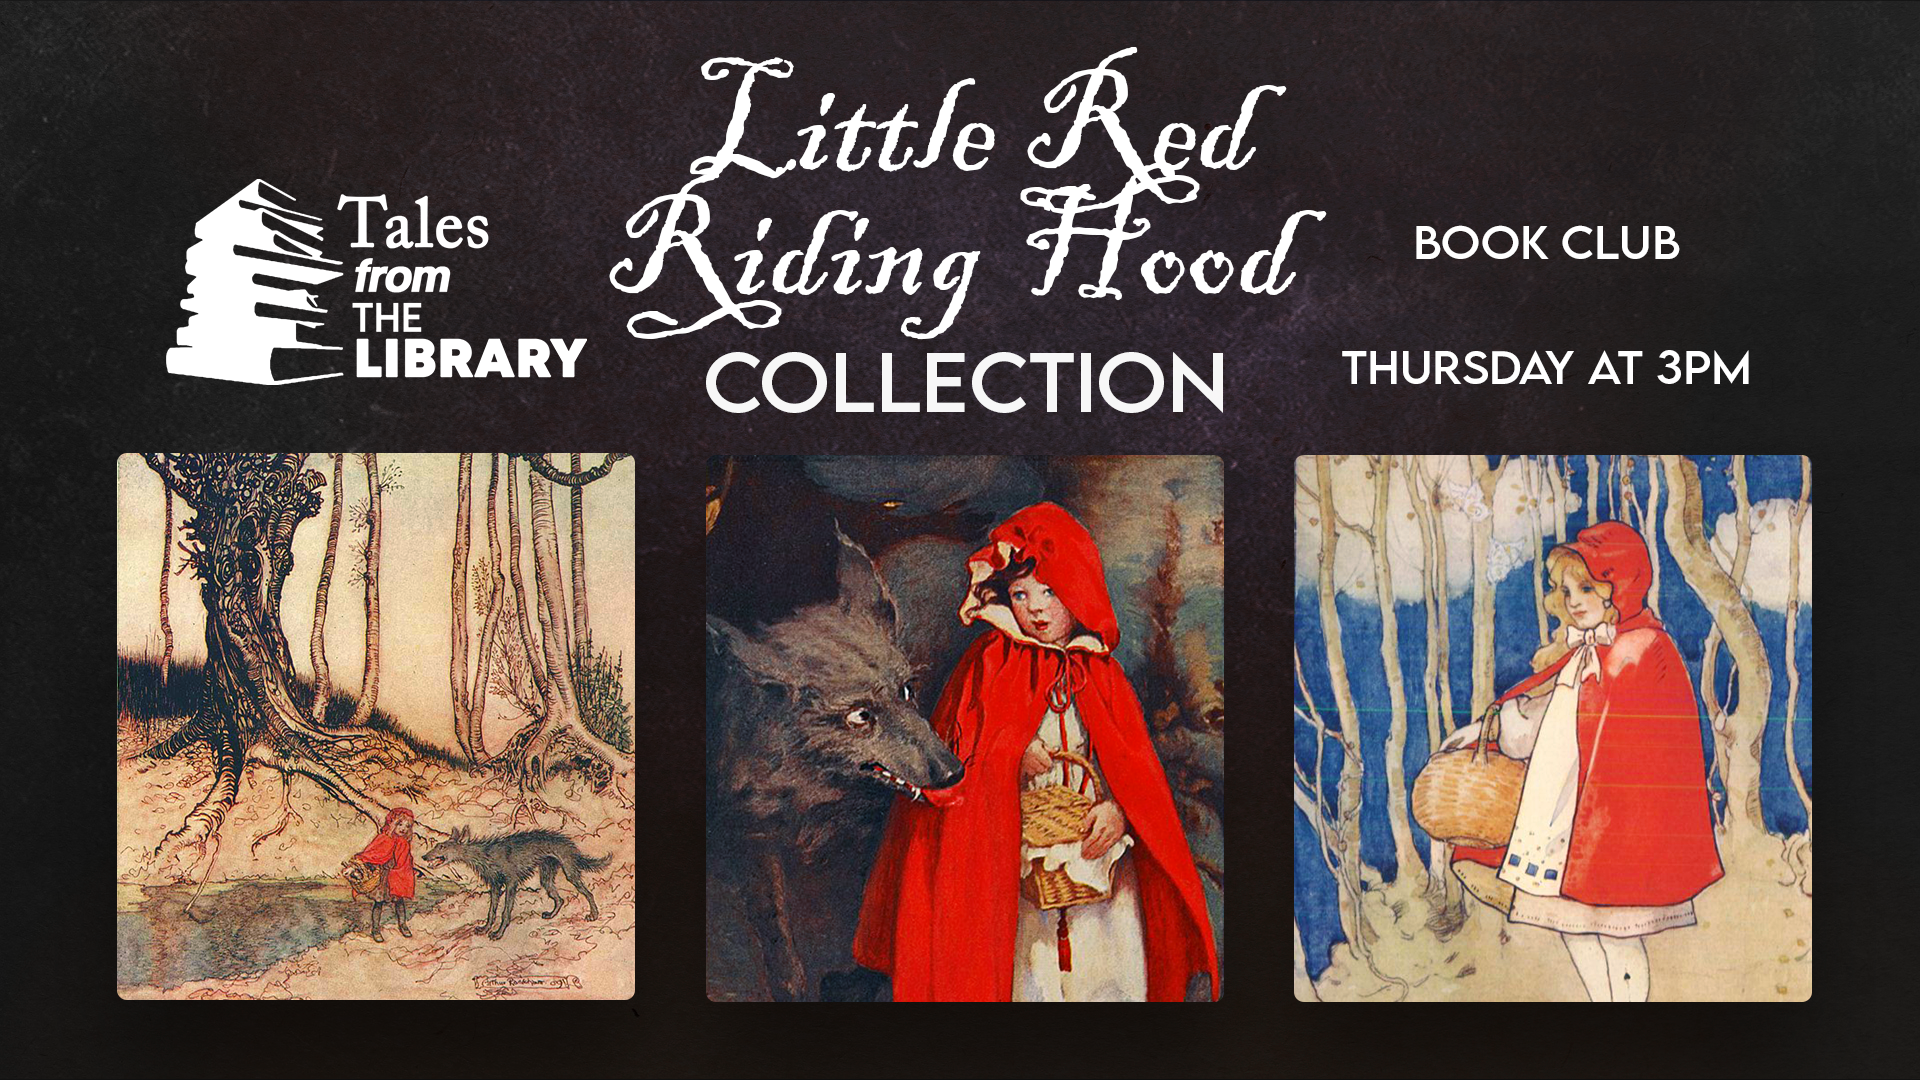 Tales From The Library - Little Red Riding Hood